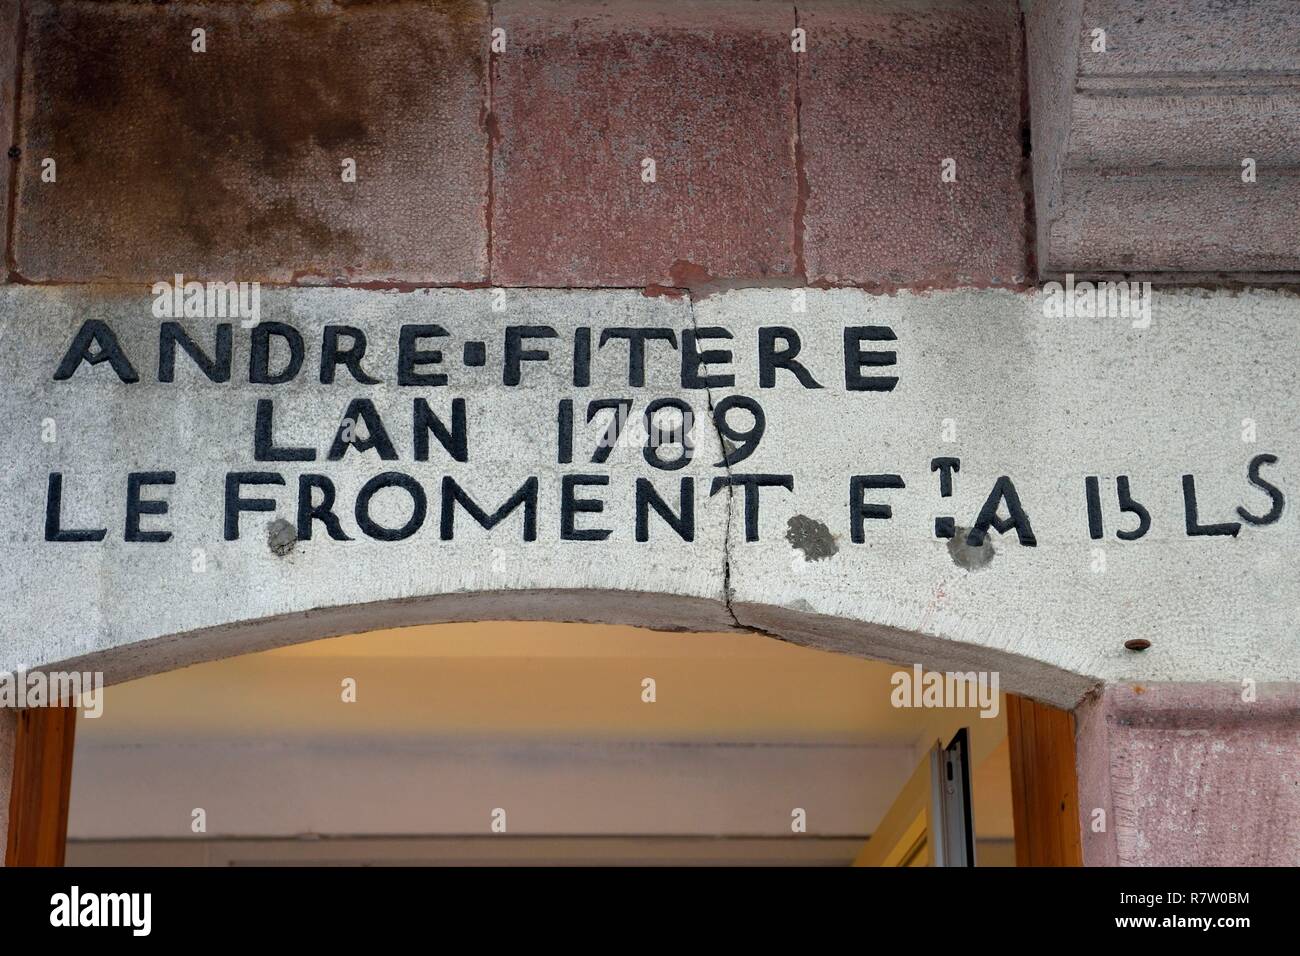 France, Pyrenees Atlantiques, Basque Country, Saint Jean Pied de Port, 9 rue d'Espagne (Spain street) on the Way of St. James, lintel that reflects the anger of the baker André Fitere who complained in 1789 of the too high price of wheat at 15 pounds Stock Photo